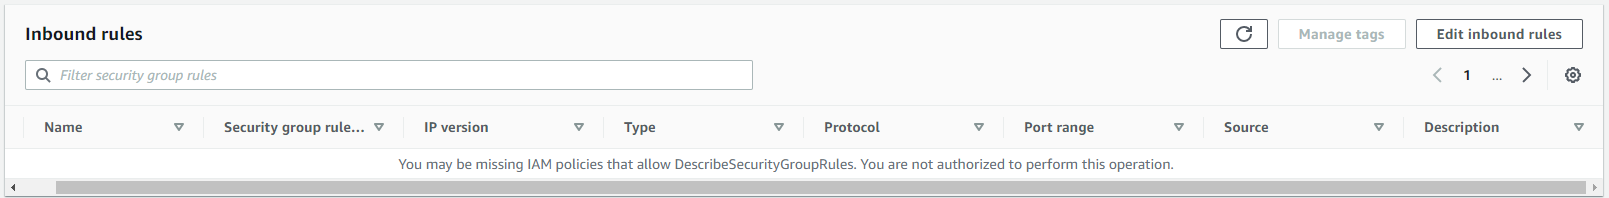 You may be missing IAM policies that allow DescribeSecurityGroupRules.You are not authorized to perform this operation.